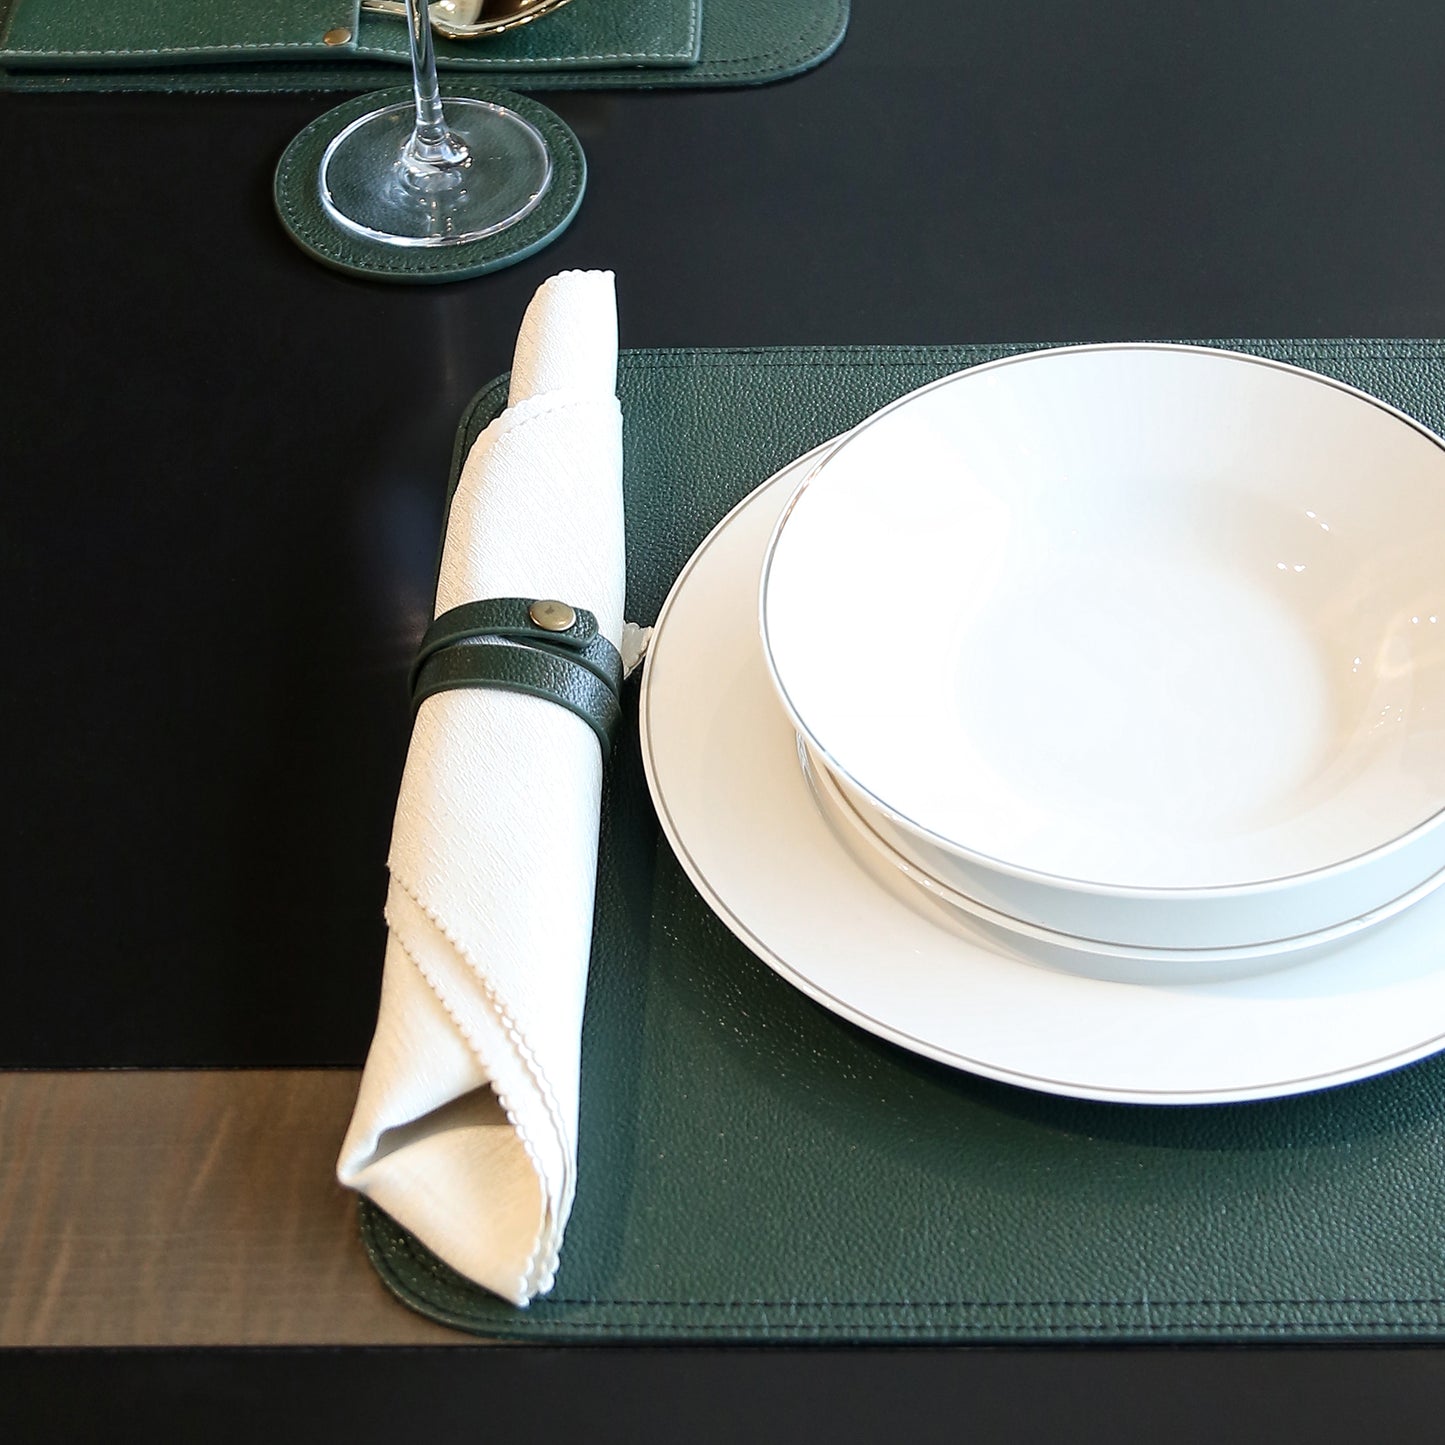 Leather Dinner Table Set of 4 (Green)